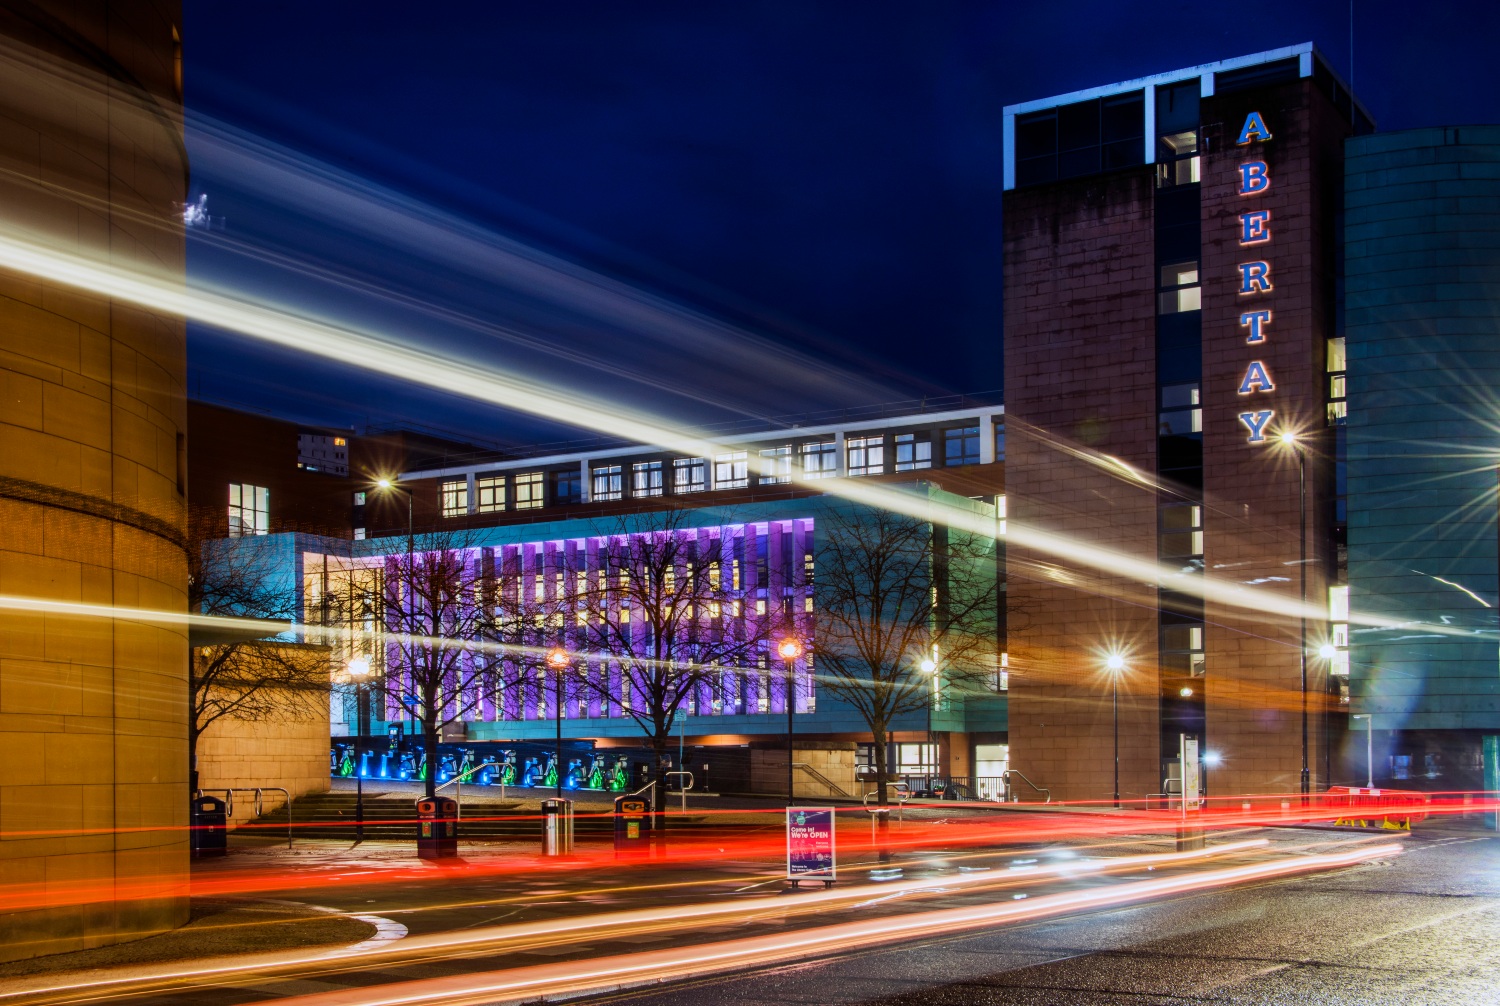 Abertay at night, which shows the Kydd Building from outside the library.